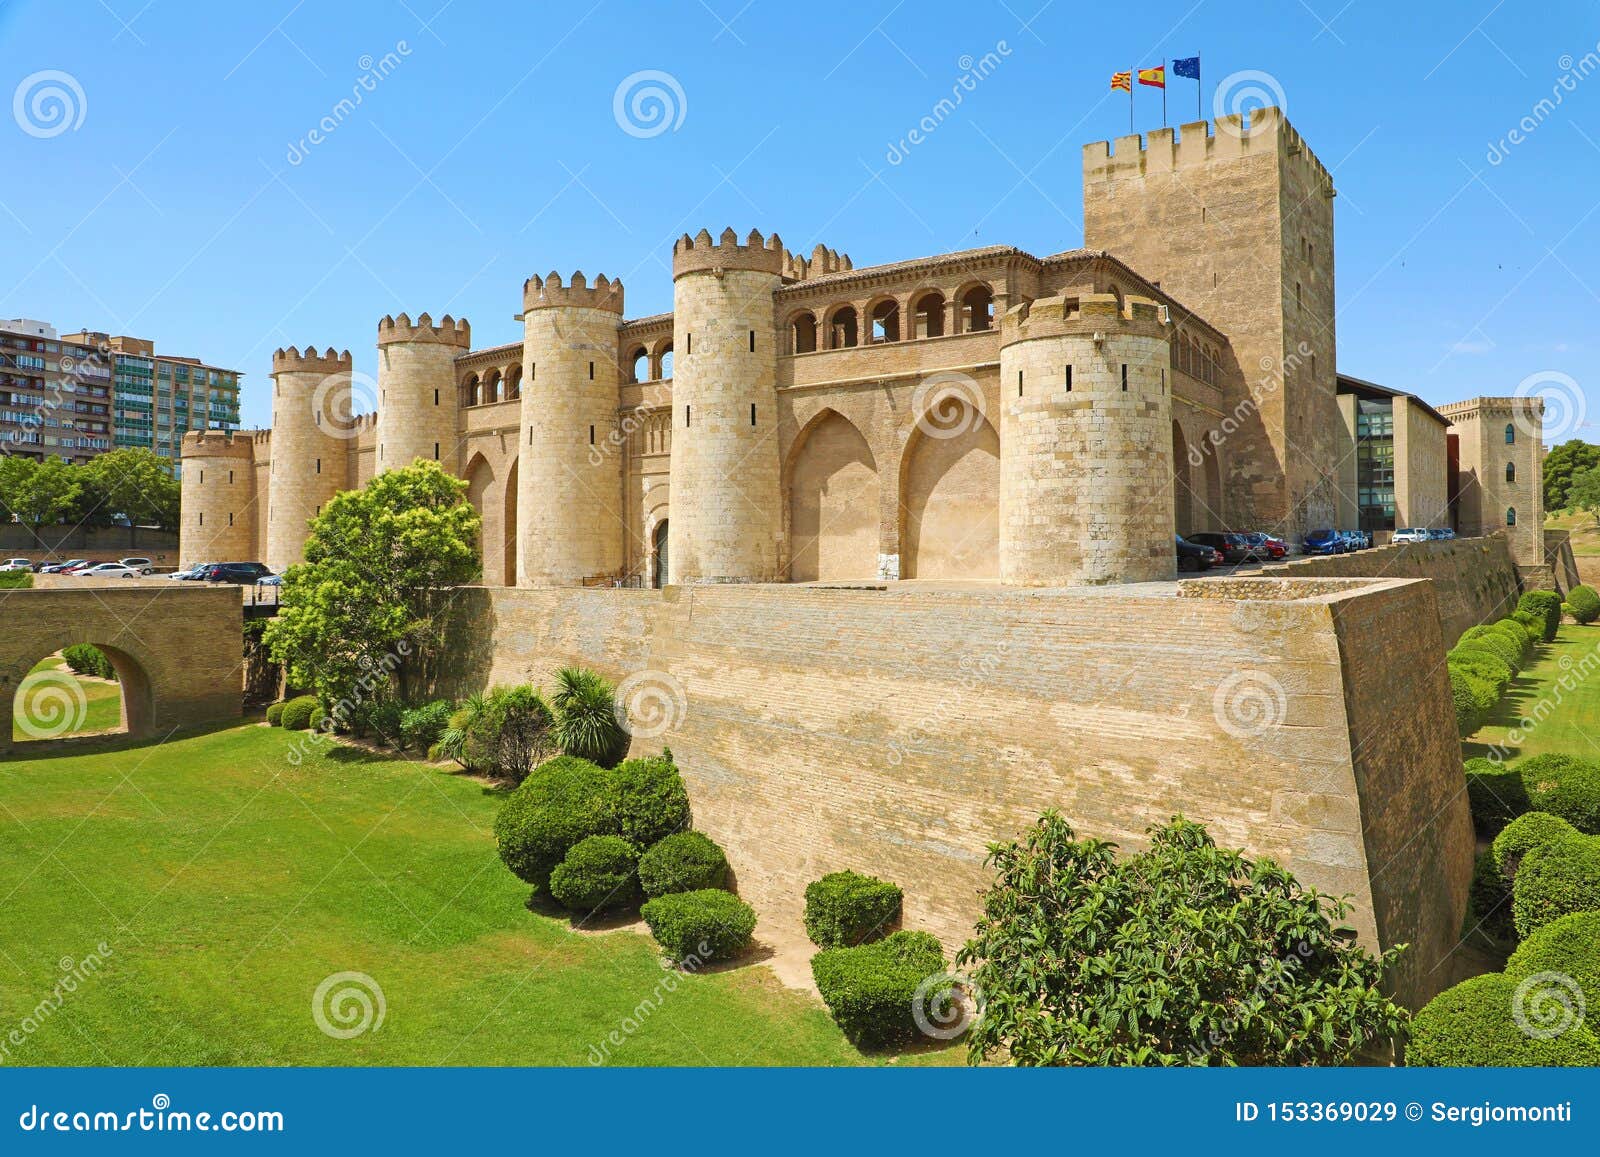 aljaferia palace in zaragoza, a medieval castle built in 11th during islamic domination of the spain